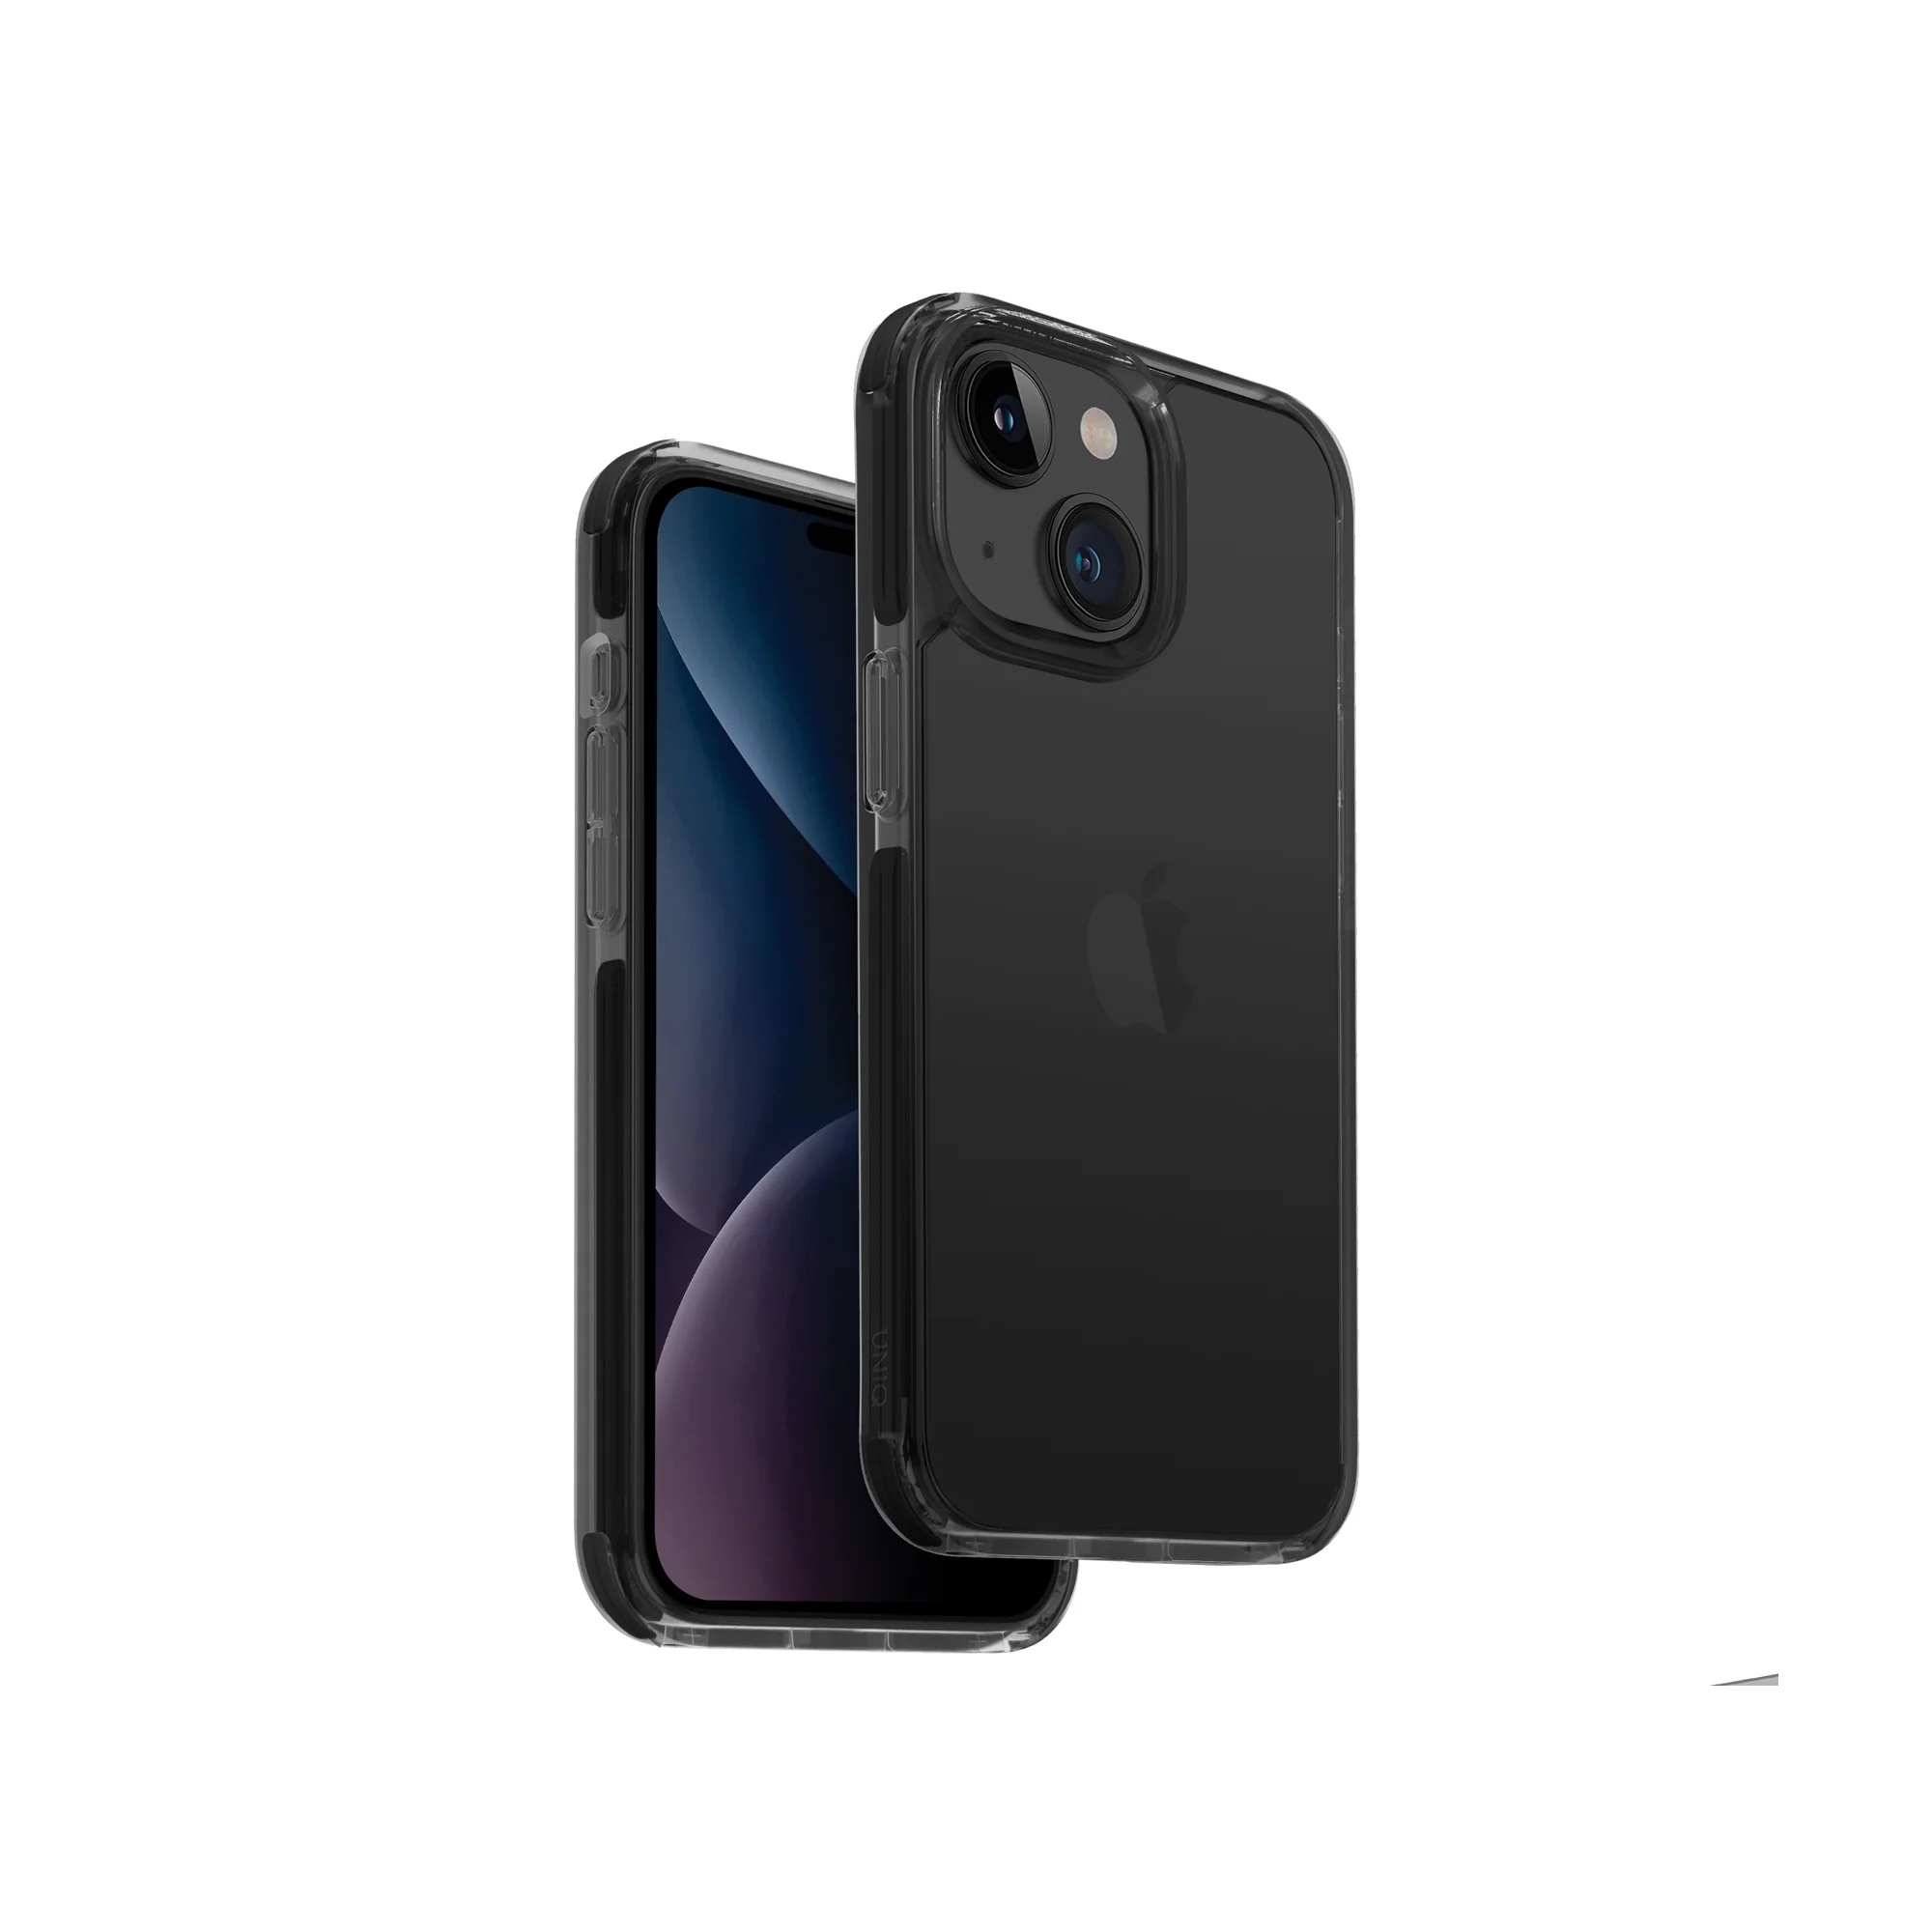 Picture of Uniq Combat Hybrid Ultra Tough Drop Protection Case for iPhone 15 6.1 (Black) Apple iPhone 15 6.1- Apple iPhone 15 6.1 Cases, Apple iPhone 15 6.1 Covers, iPad Cases and a wide selection of Apple iPhone 15 6.1 Accessories in Malaysia, Sabah, Sarawak and Singapore 